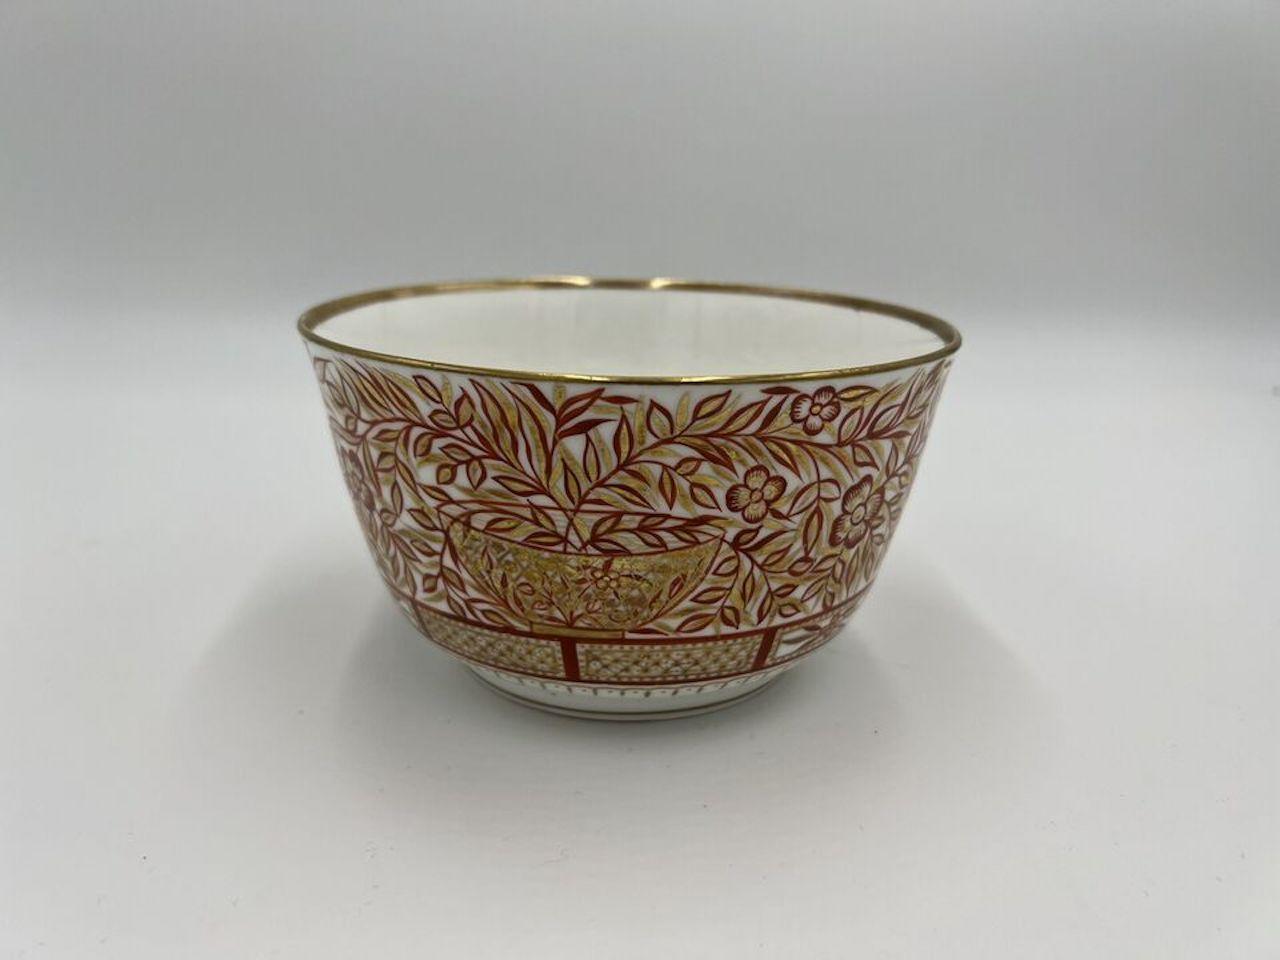 British Antique English Mintons Porcelain Chinoiserie Waste Bowl Circa 1830 For Sale